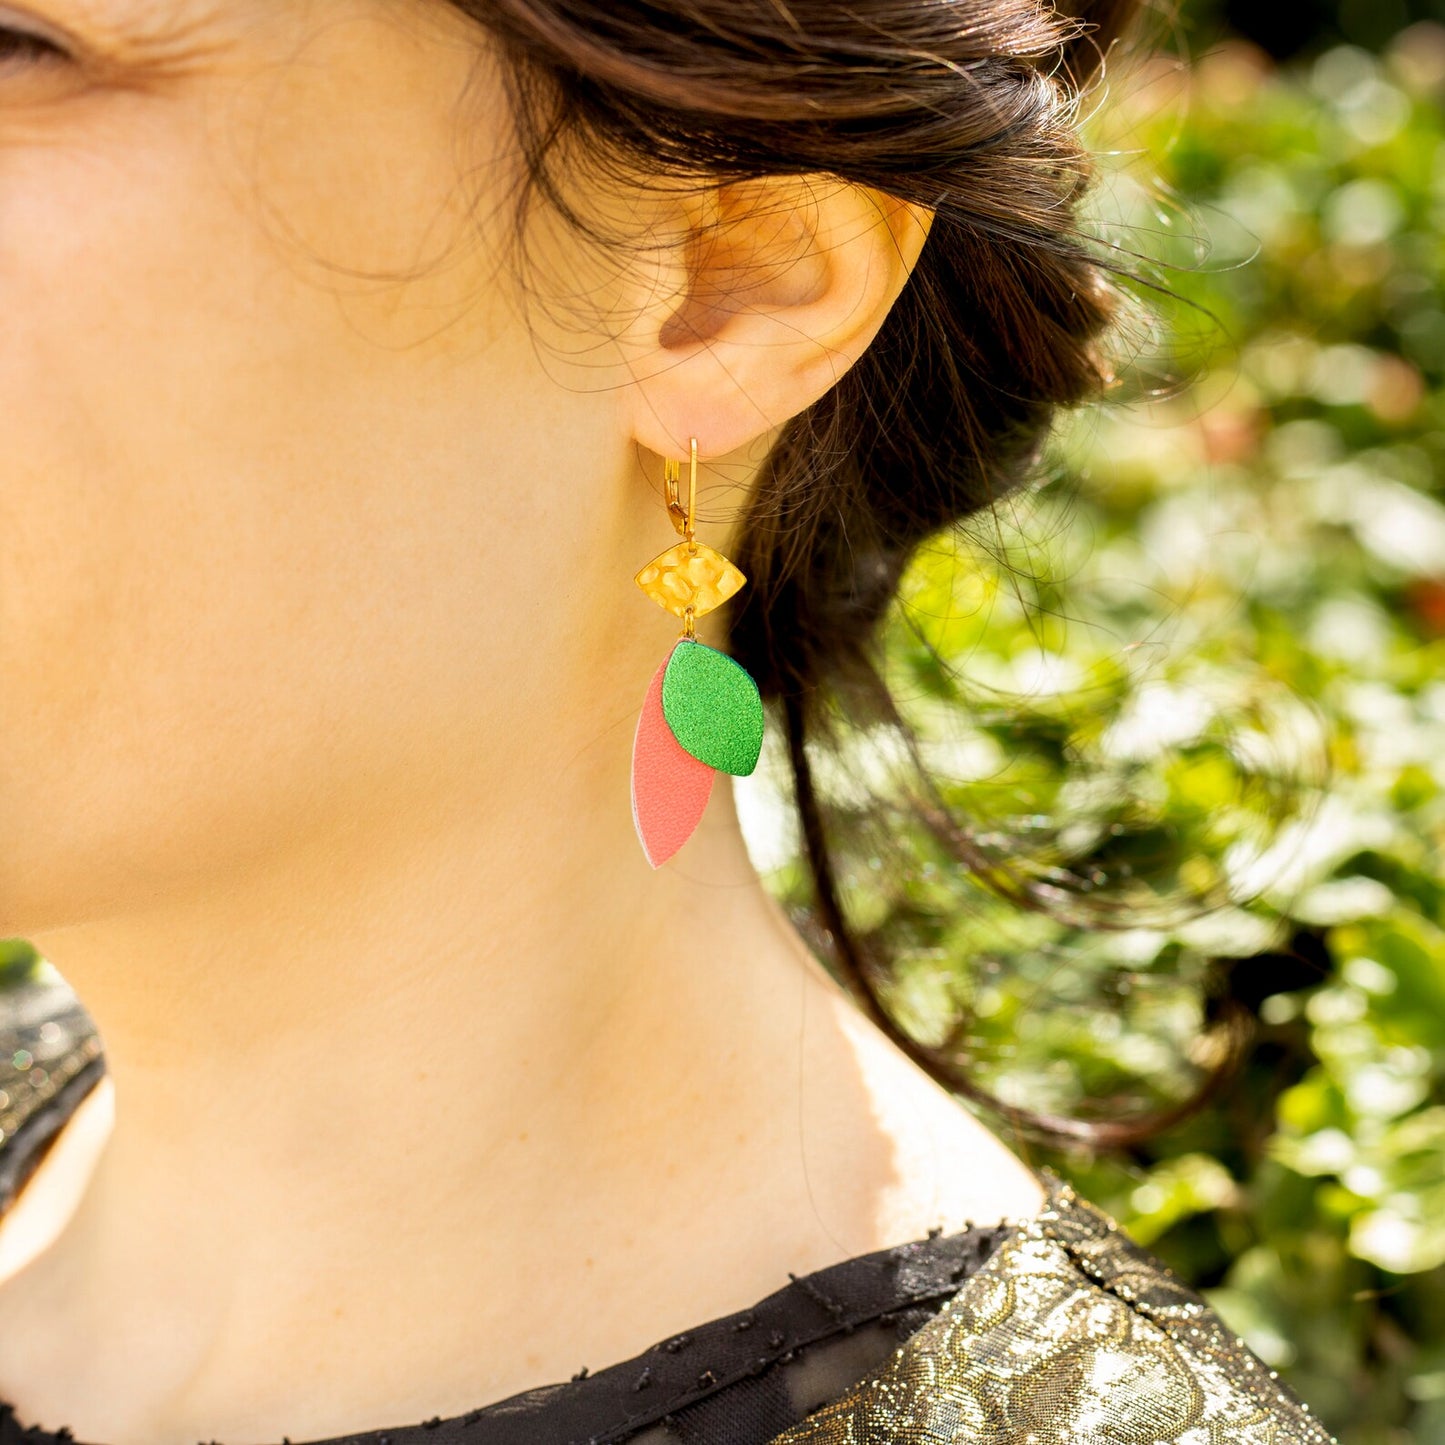 Lozaa earrings - gold leather and sugared pink petals